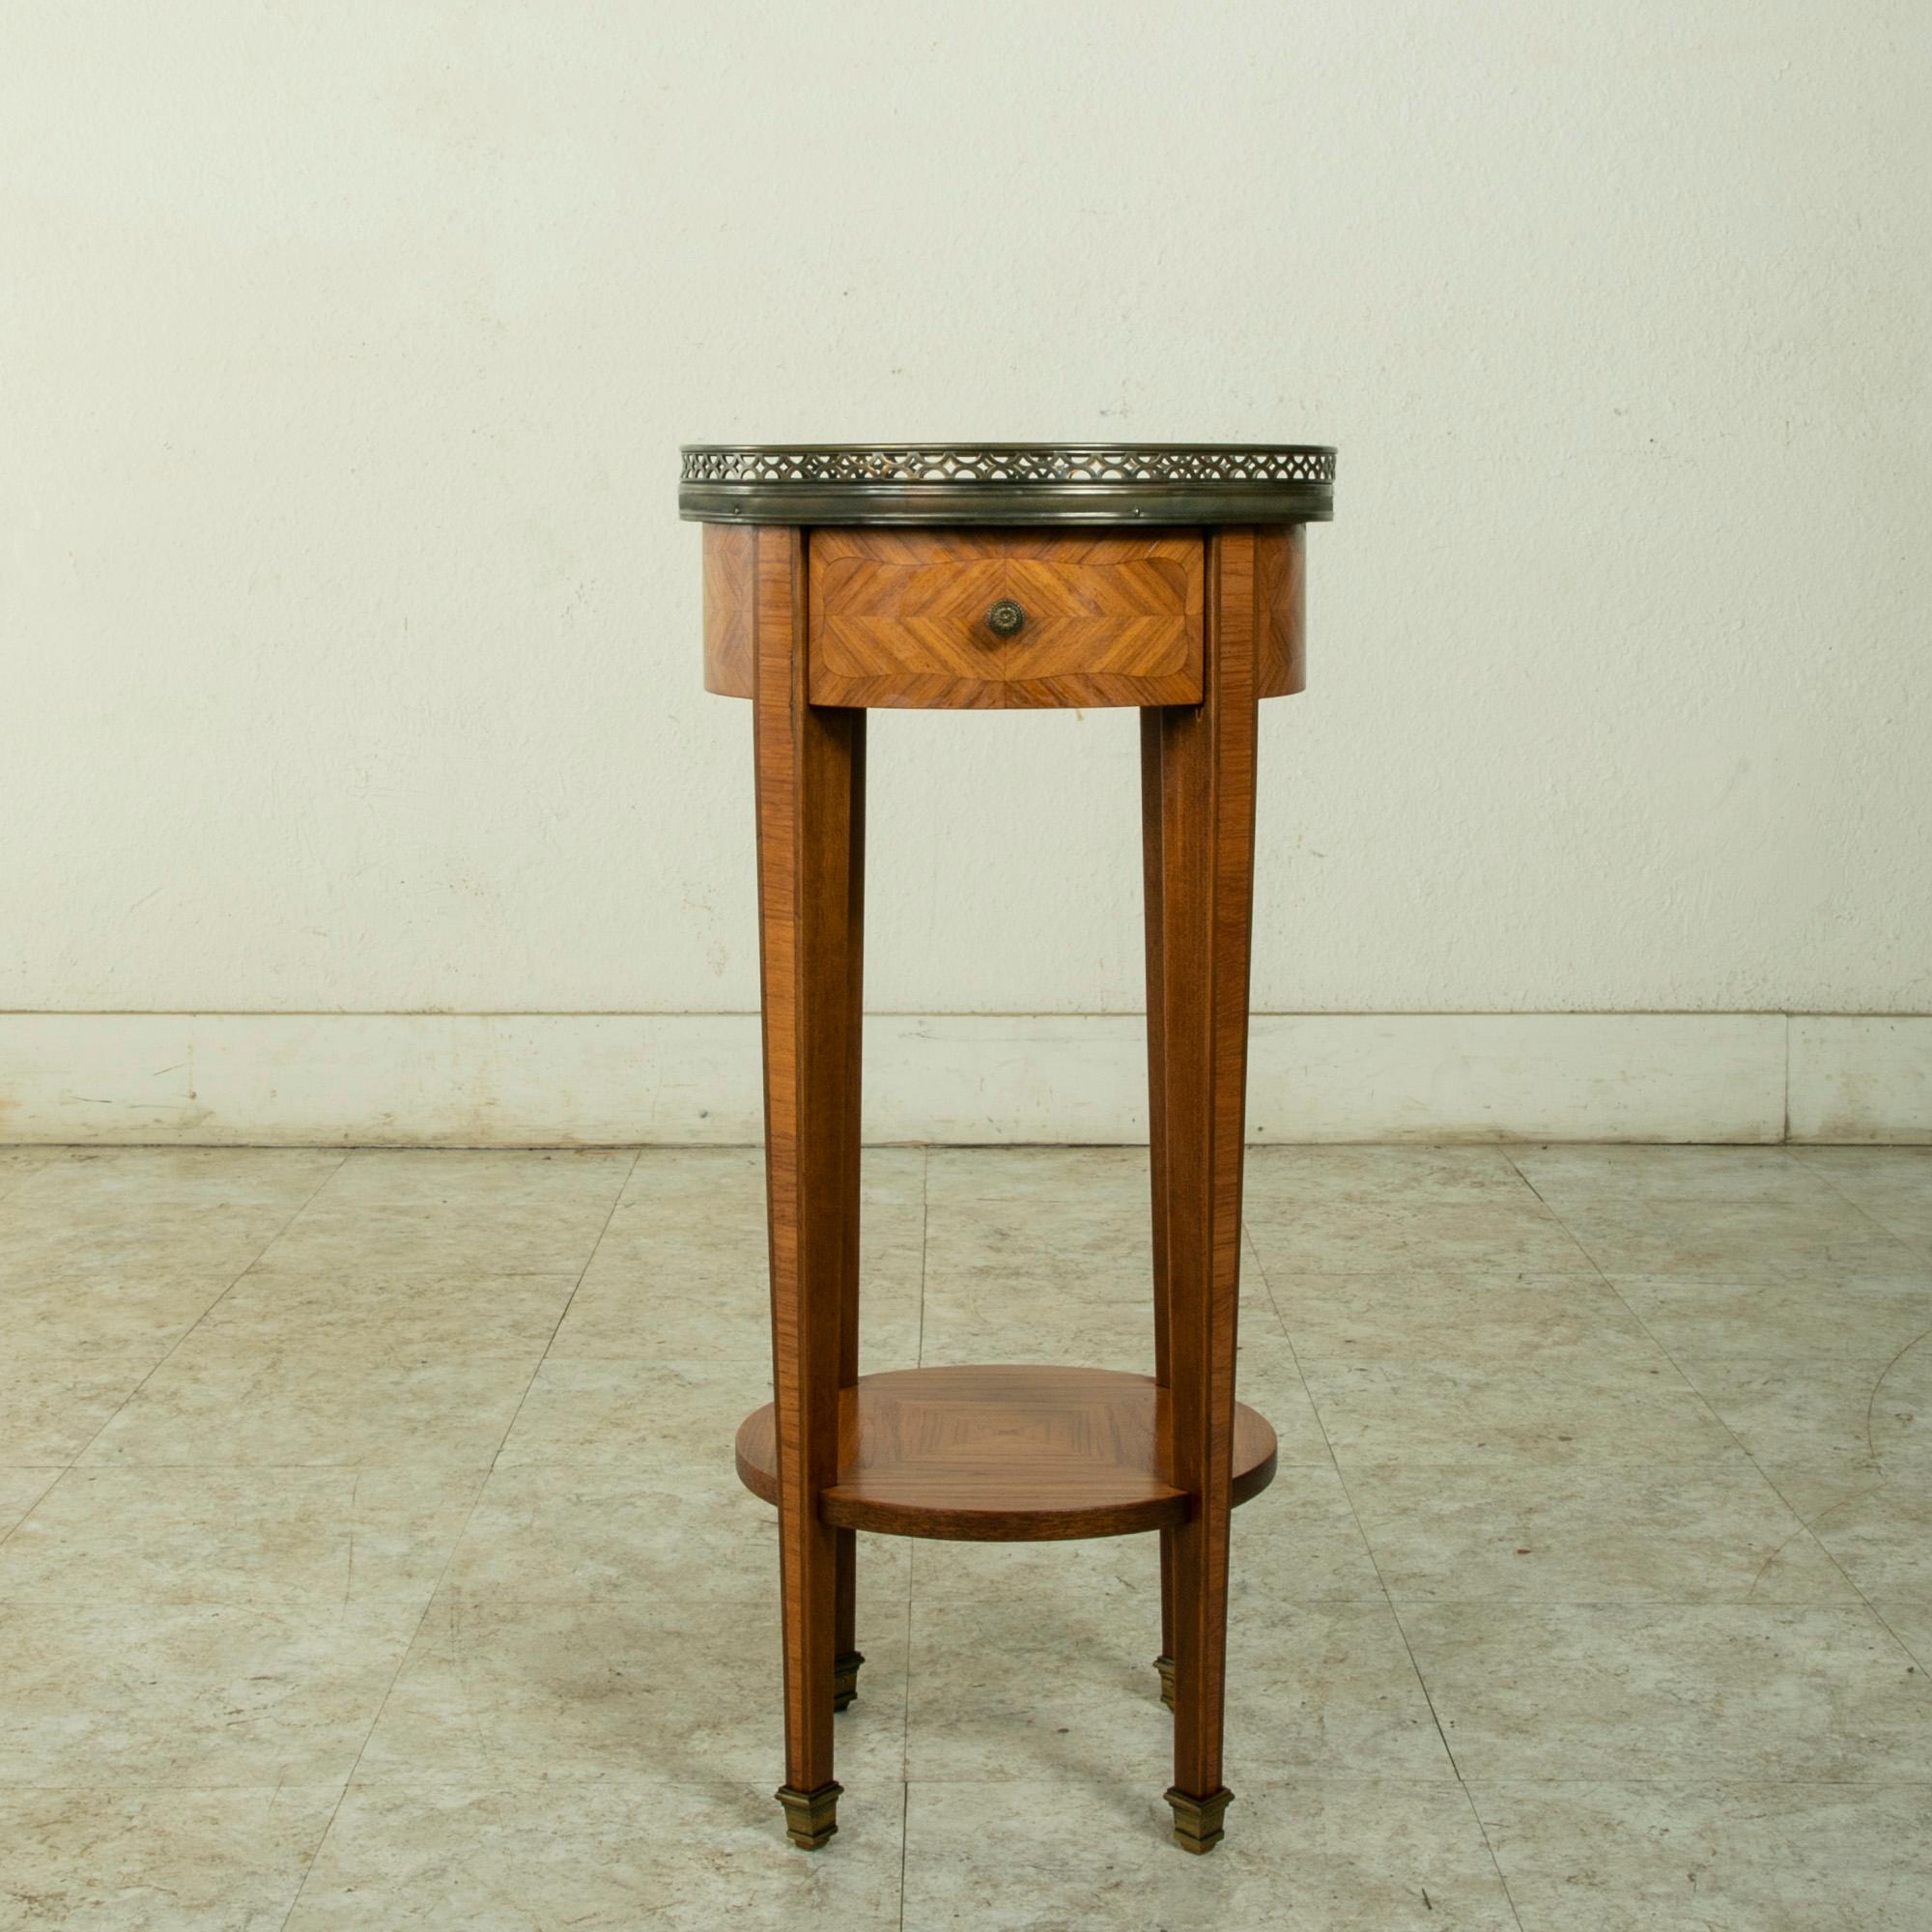 This small scale early twentieth century French Louis XVI style rosewood marquetry side table features a marble top surrounded by a pieced bronze gallery. The rosewood marquetry on each side is divided in quarters with alternating grain patterns